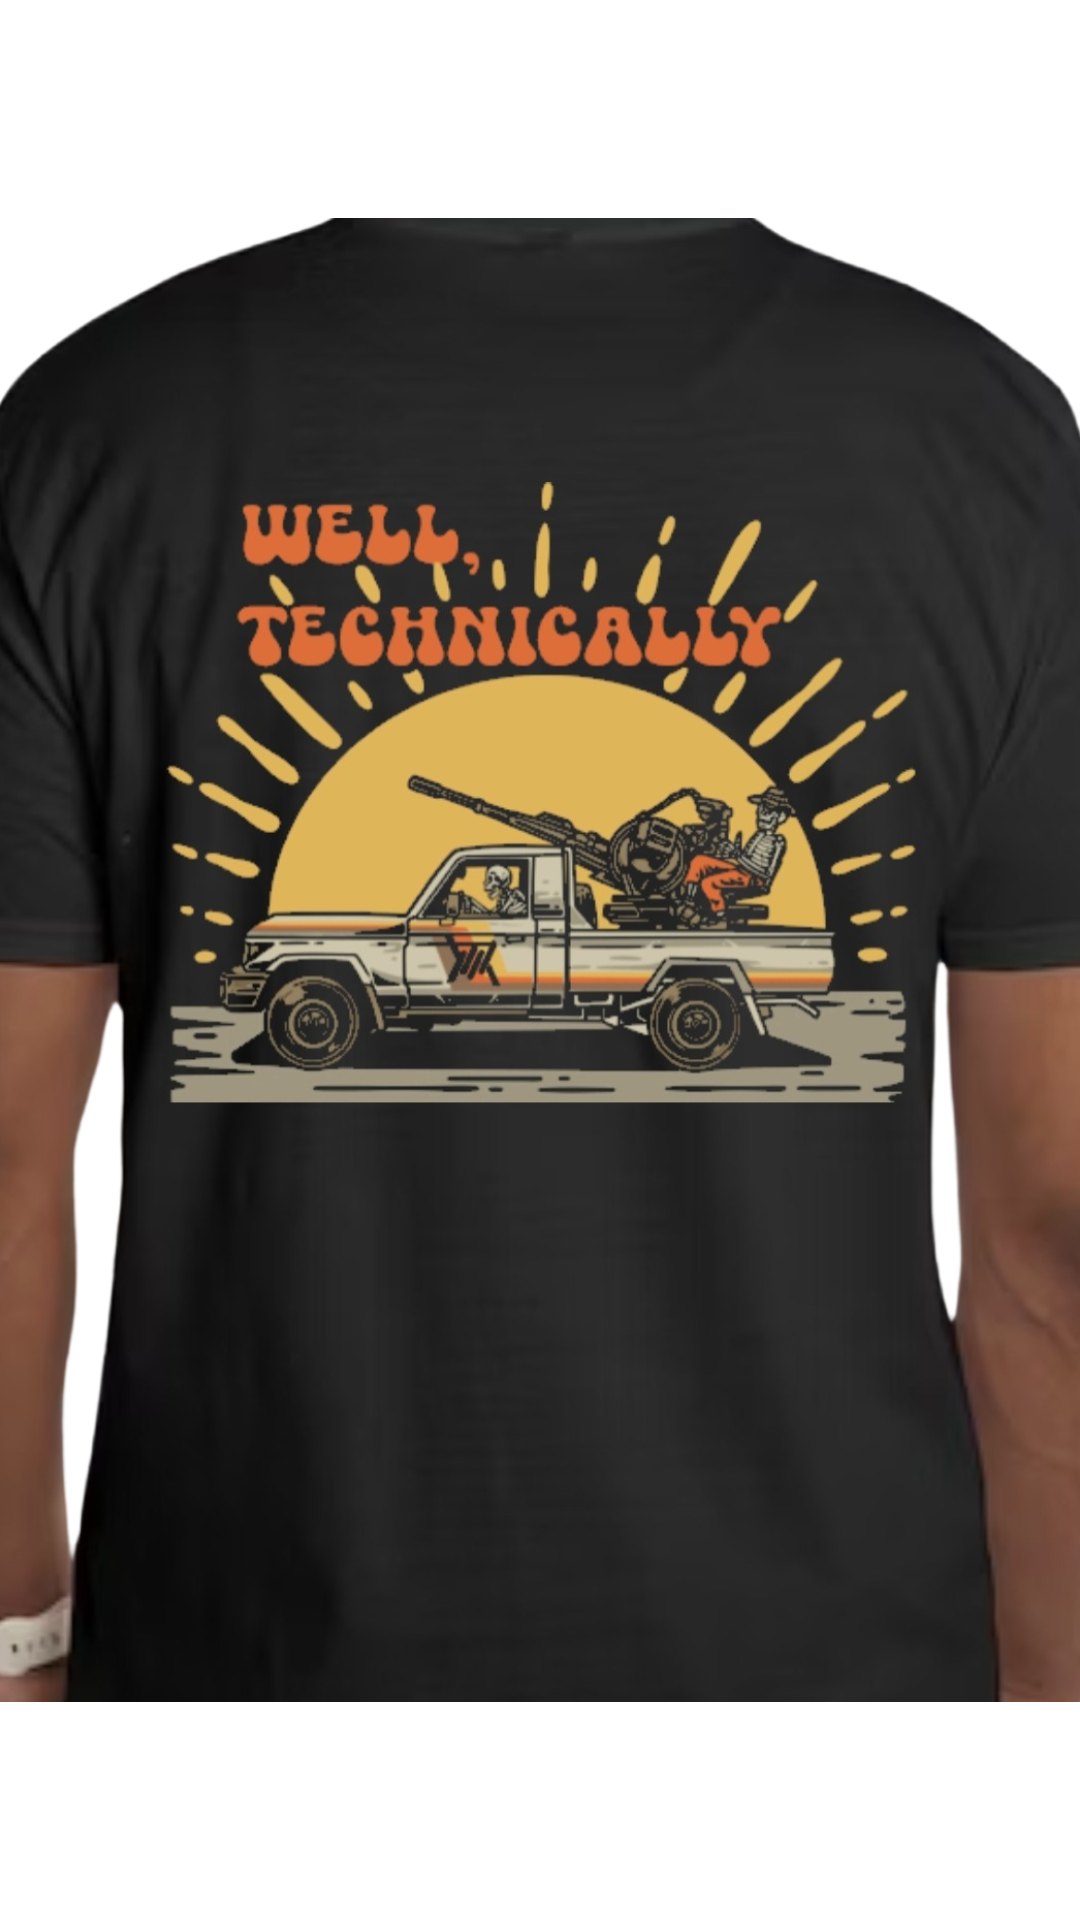 Blanchewater "Well, Technically" Tee